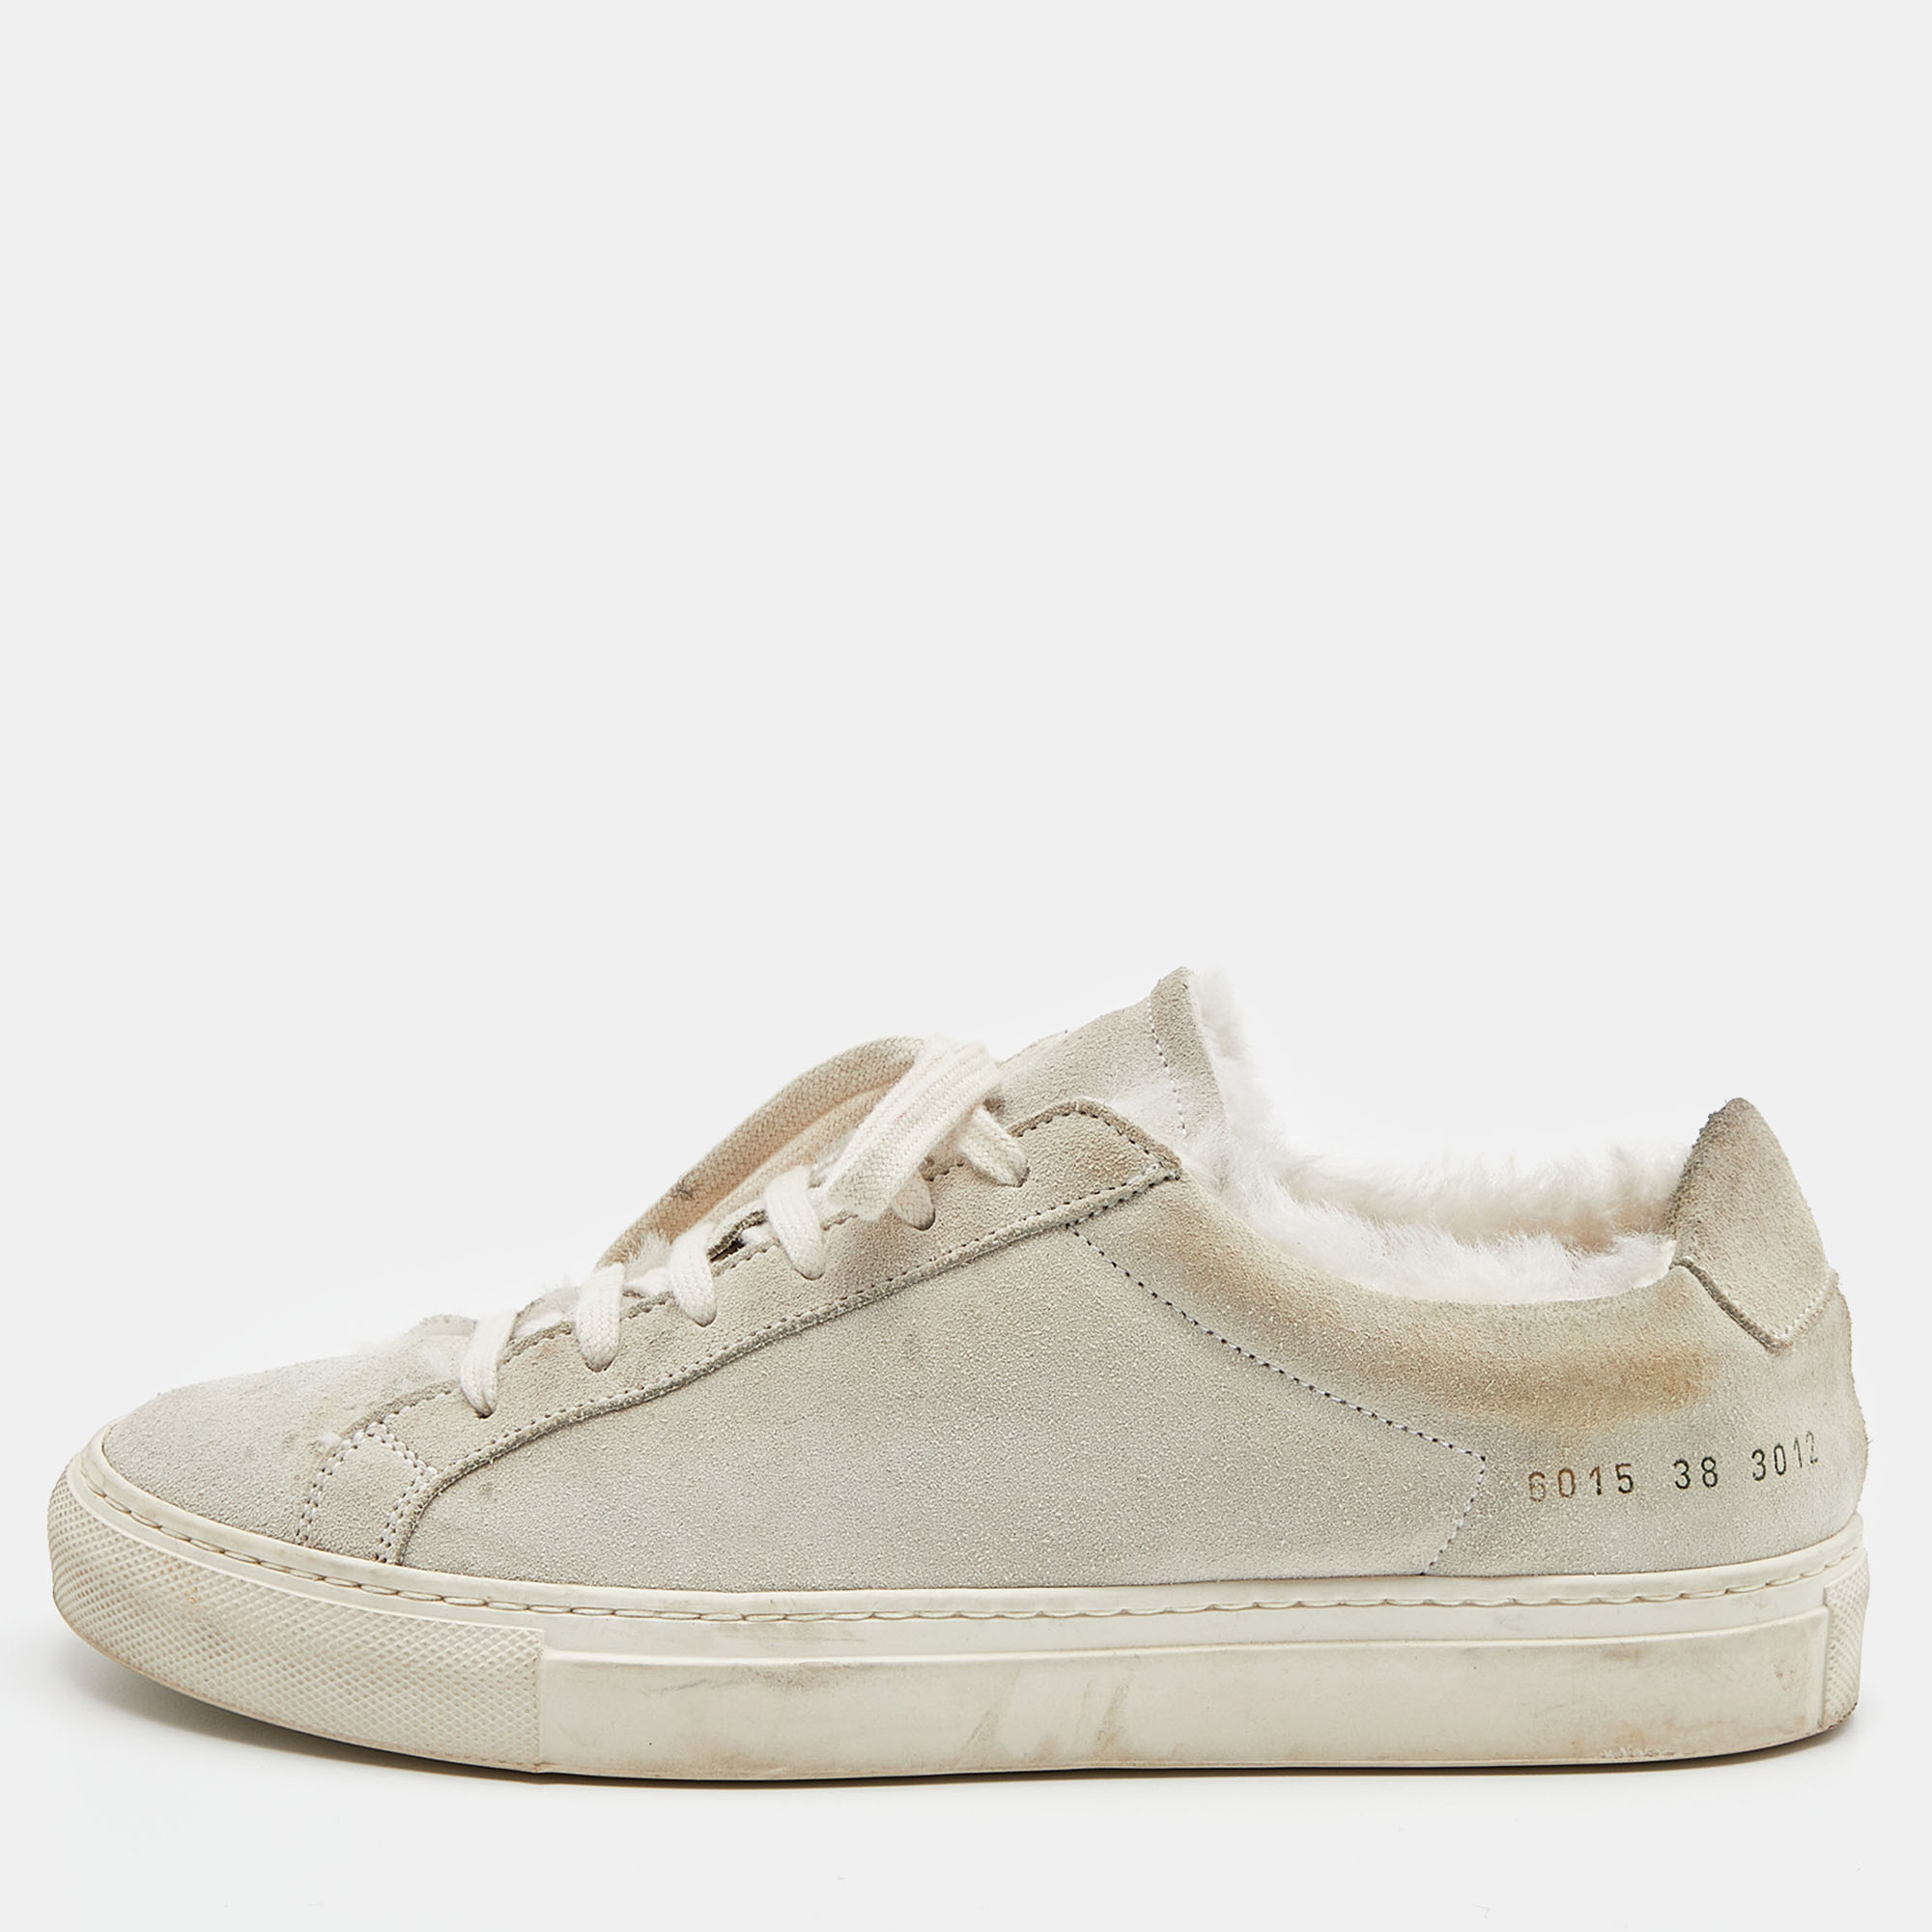 Common Projects Grey Suede Achilles Lace Up Sneakers Size 38